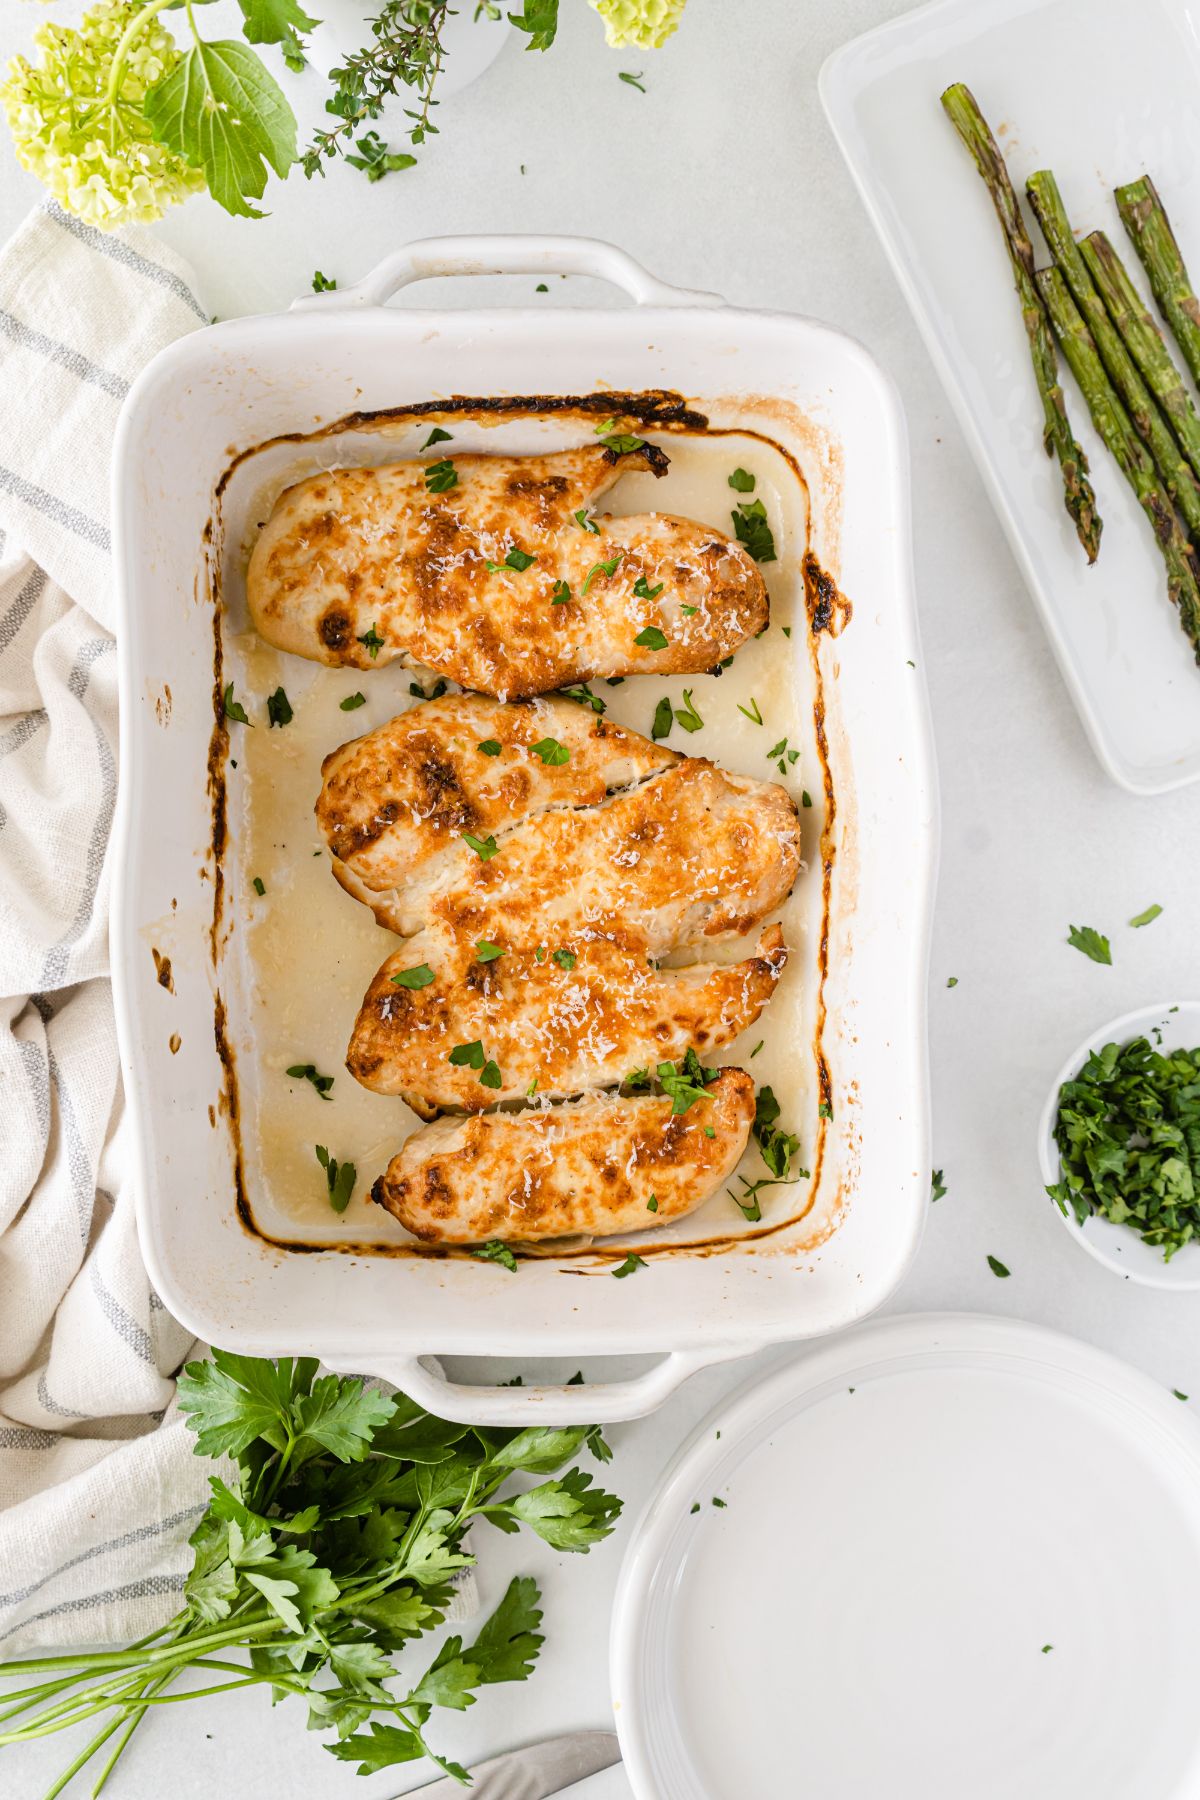 Mayo Parmesan Chicken in a baking dish with asparagus and salad on the side.